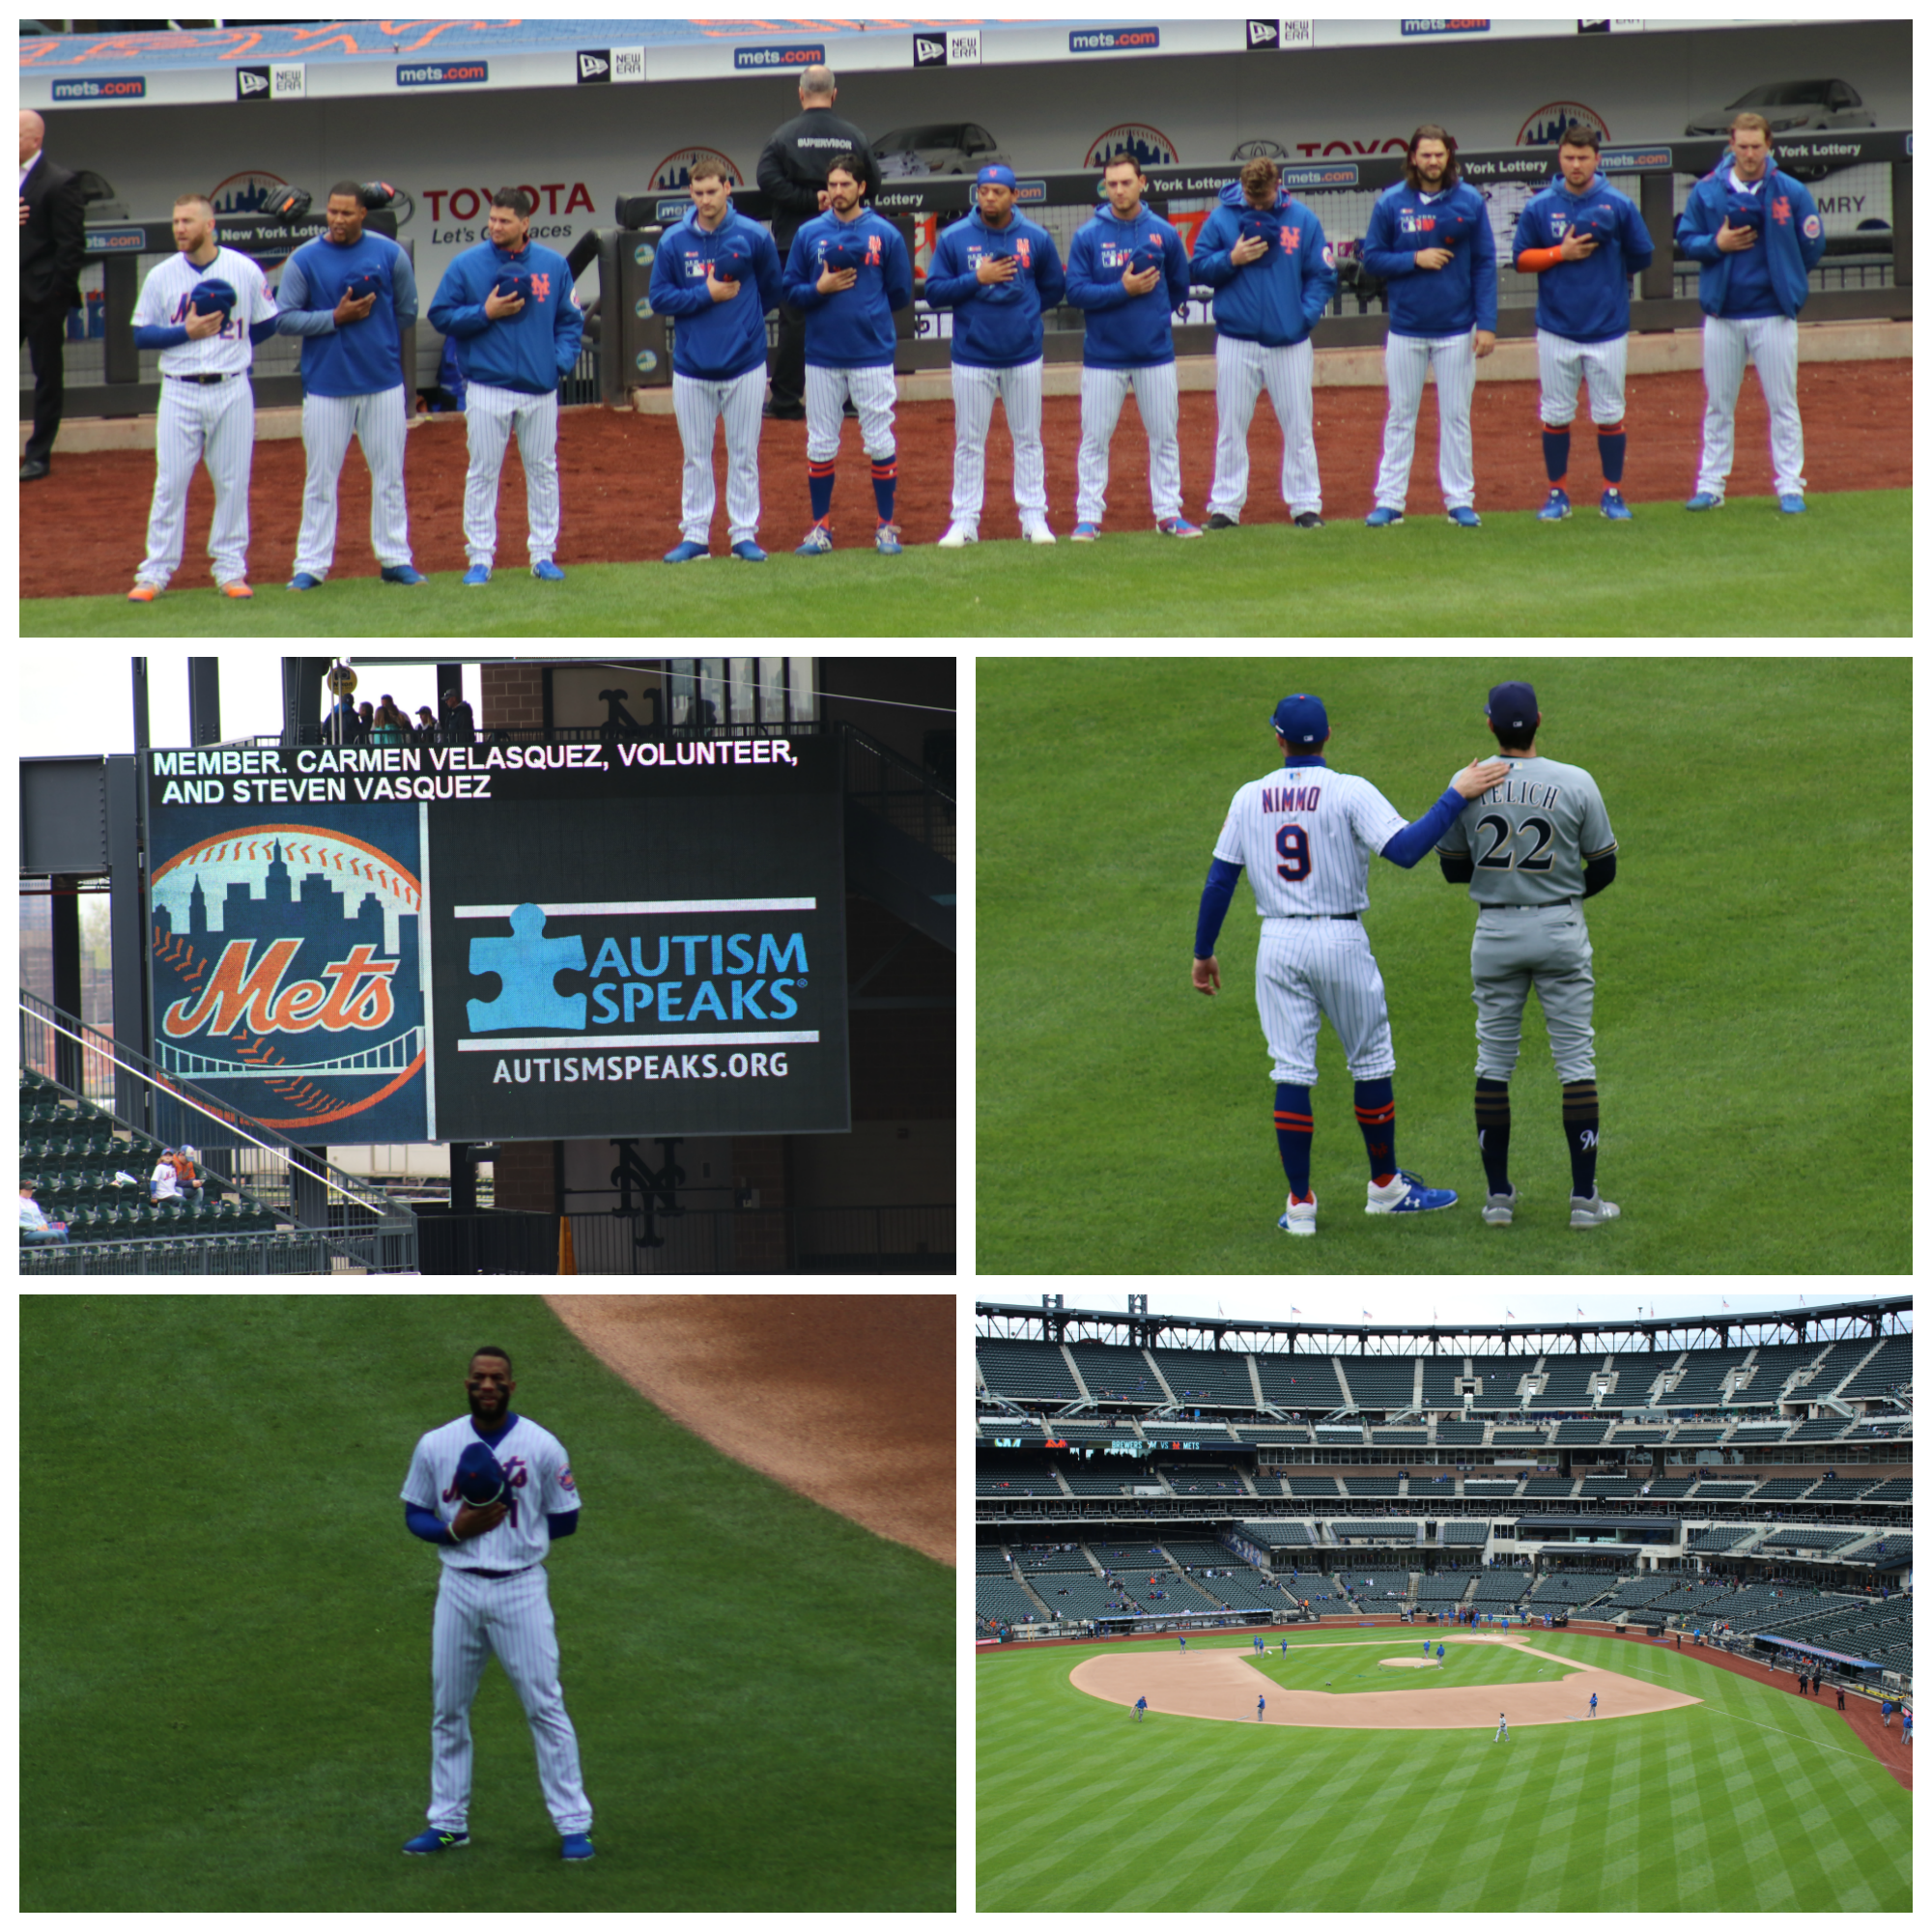 Collage of Mets players and Citi Field